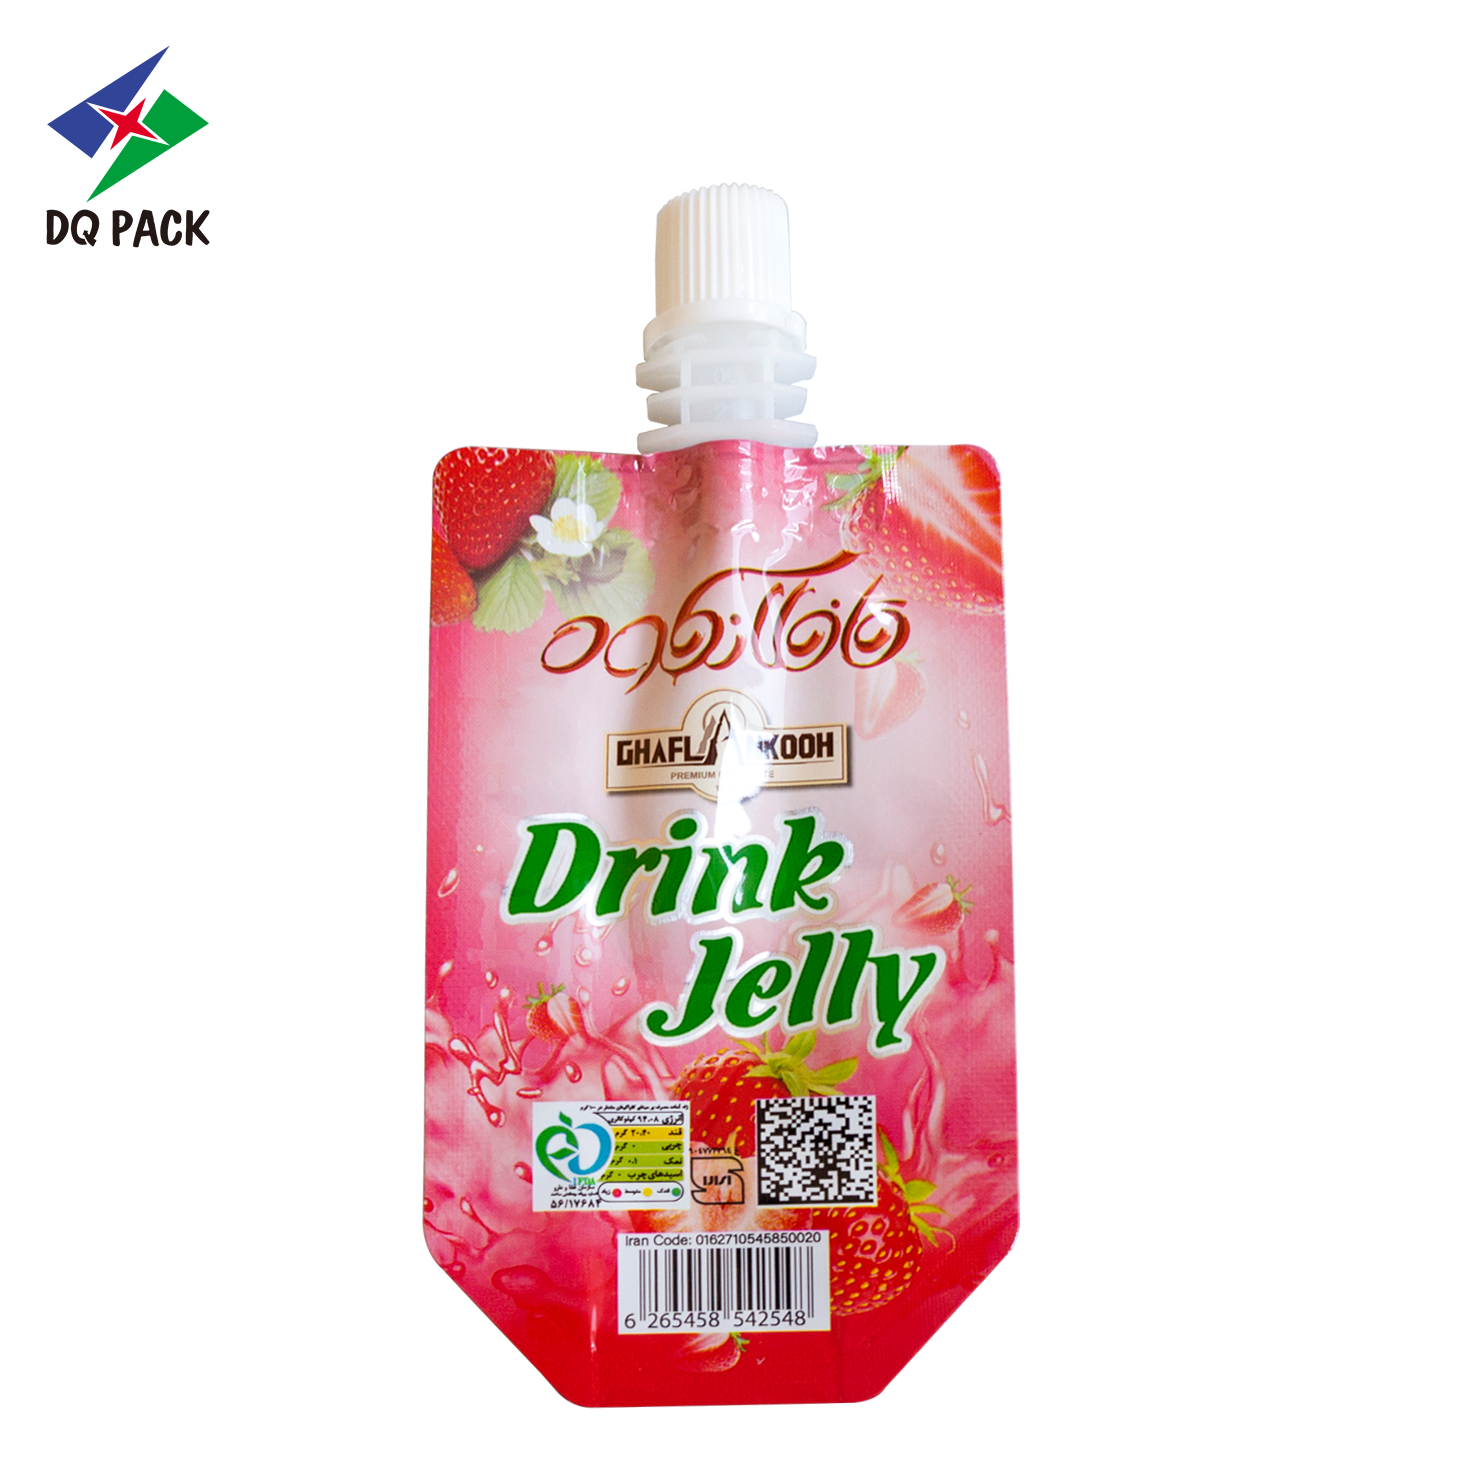 DQ PACK Colorful Design Juice Side Gusset Bag Plastic Packaging Pouch Jelly Spout Pouch For Sale